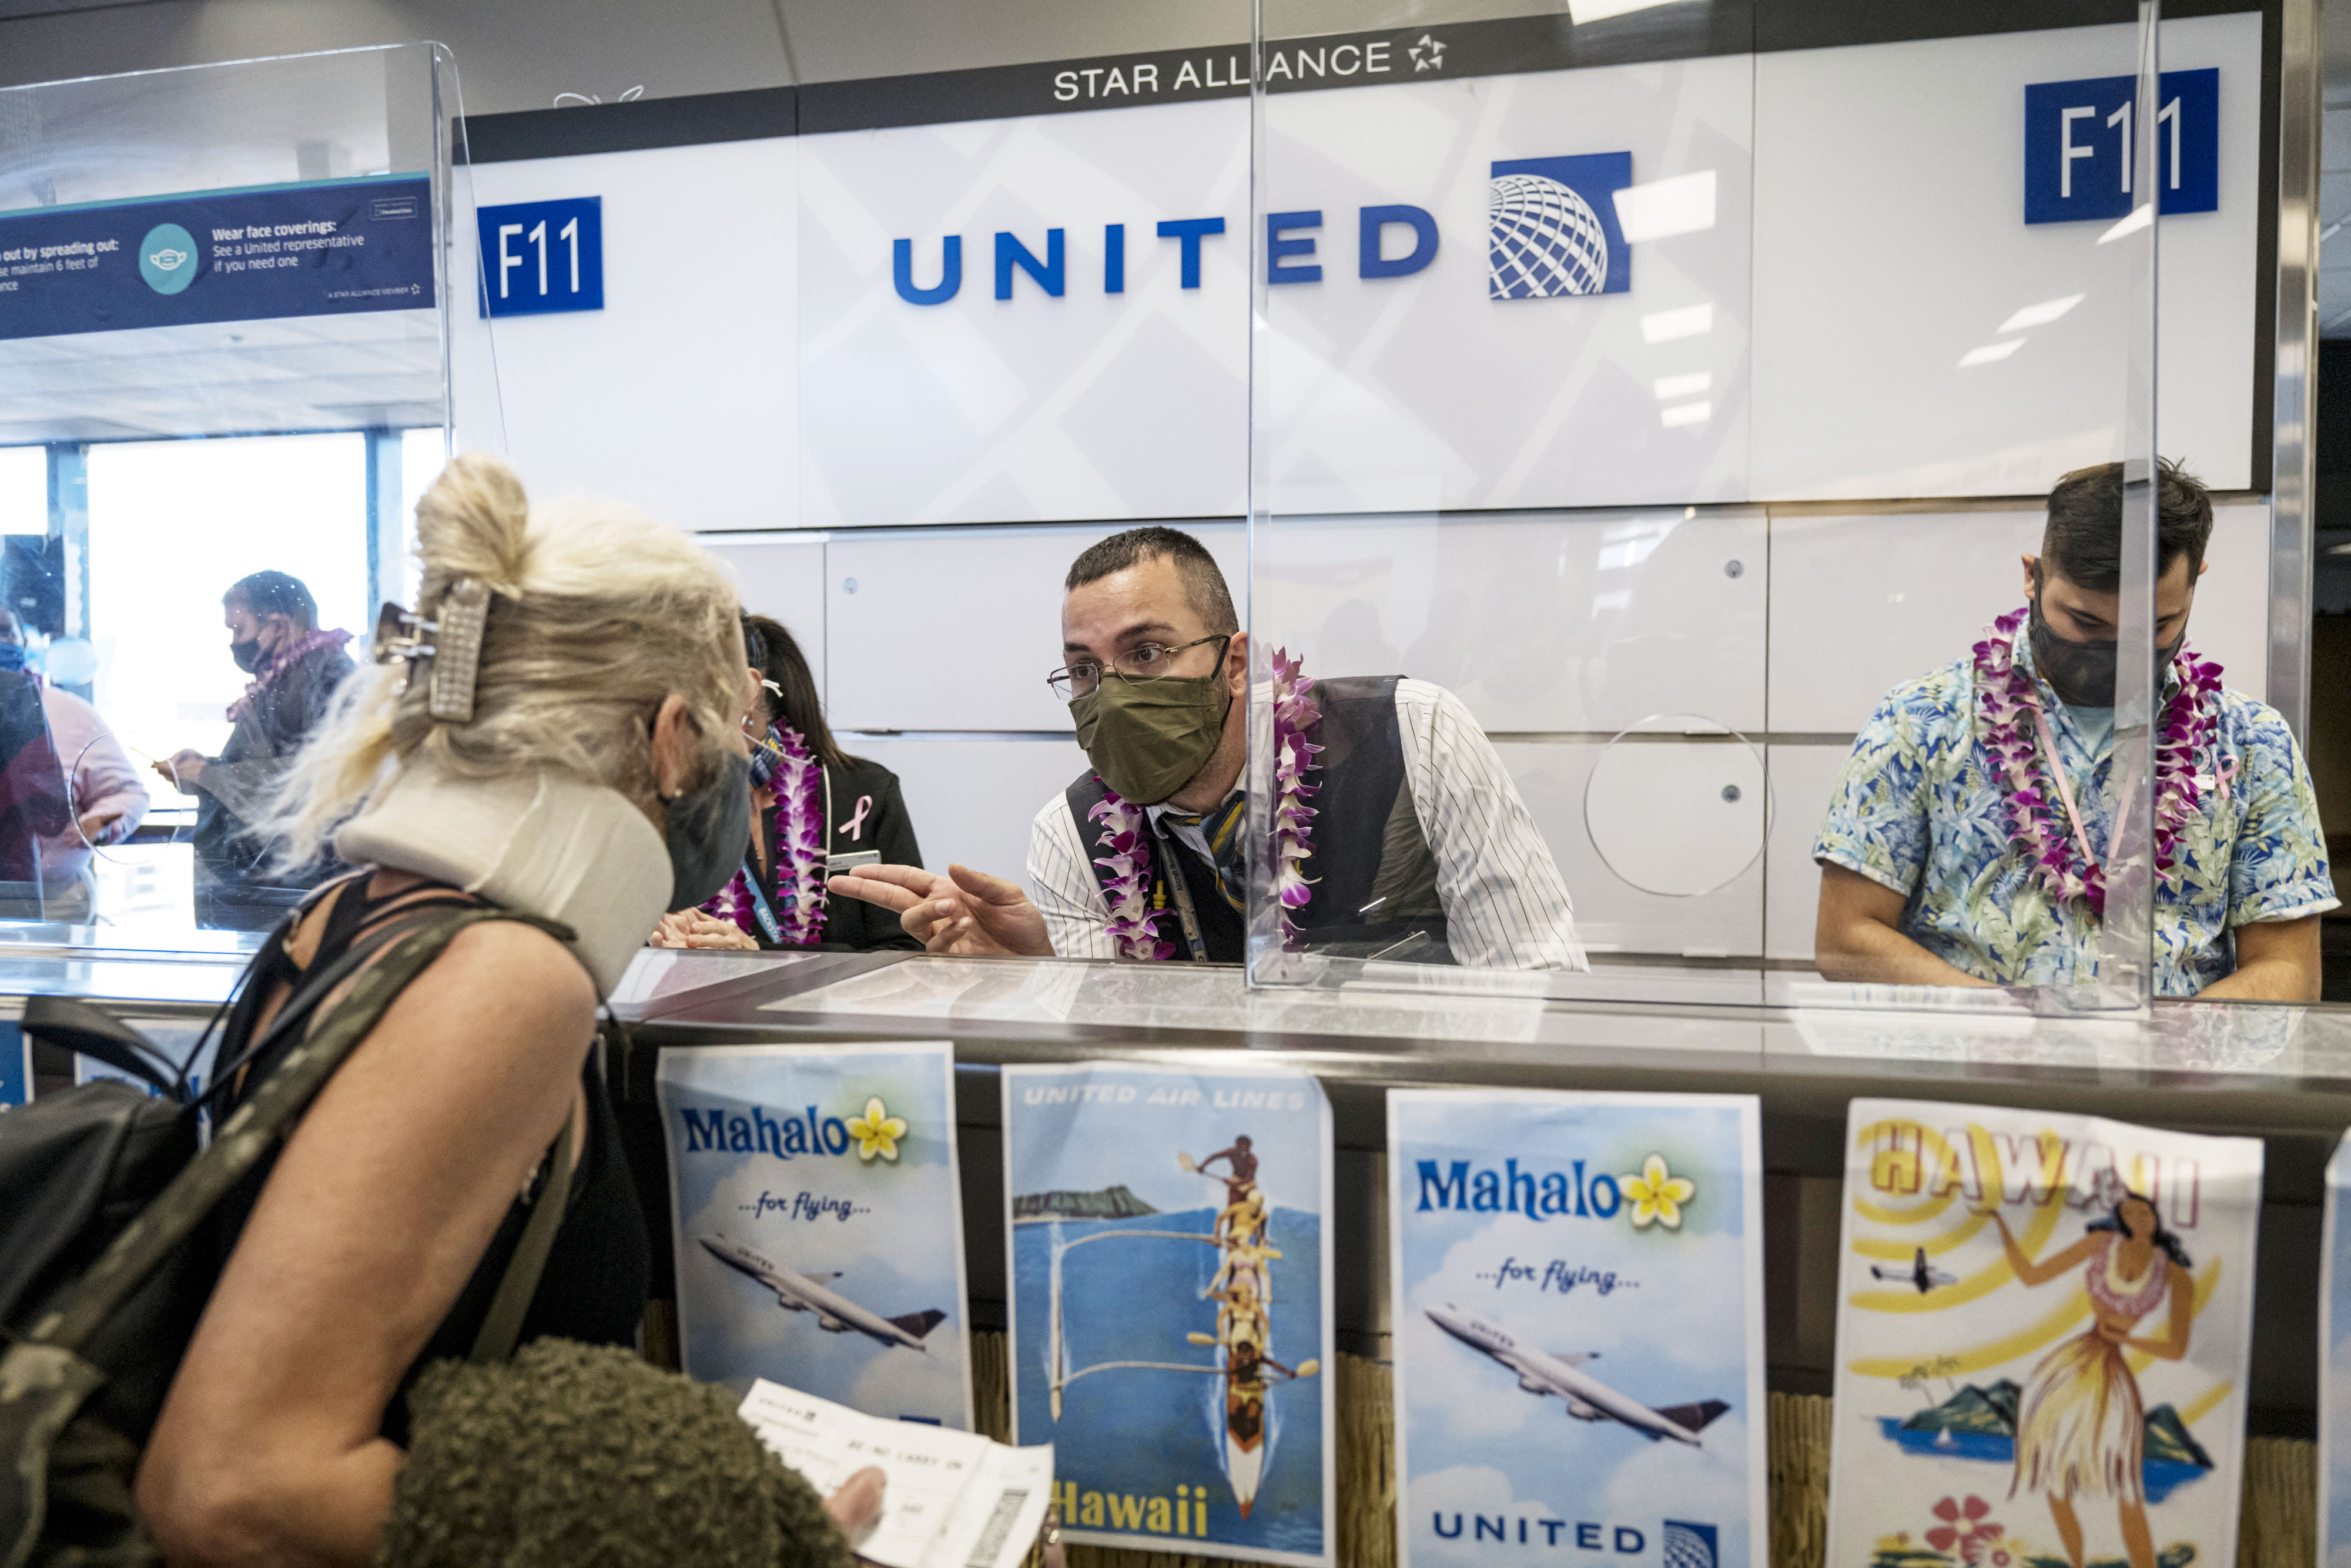 The CEO of United Airlines wants to make Covid vaccines mandatory for the company’s employees